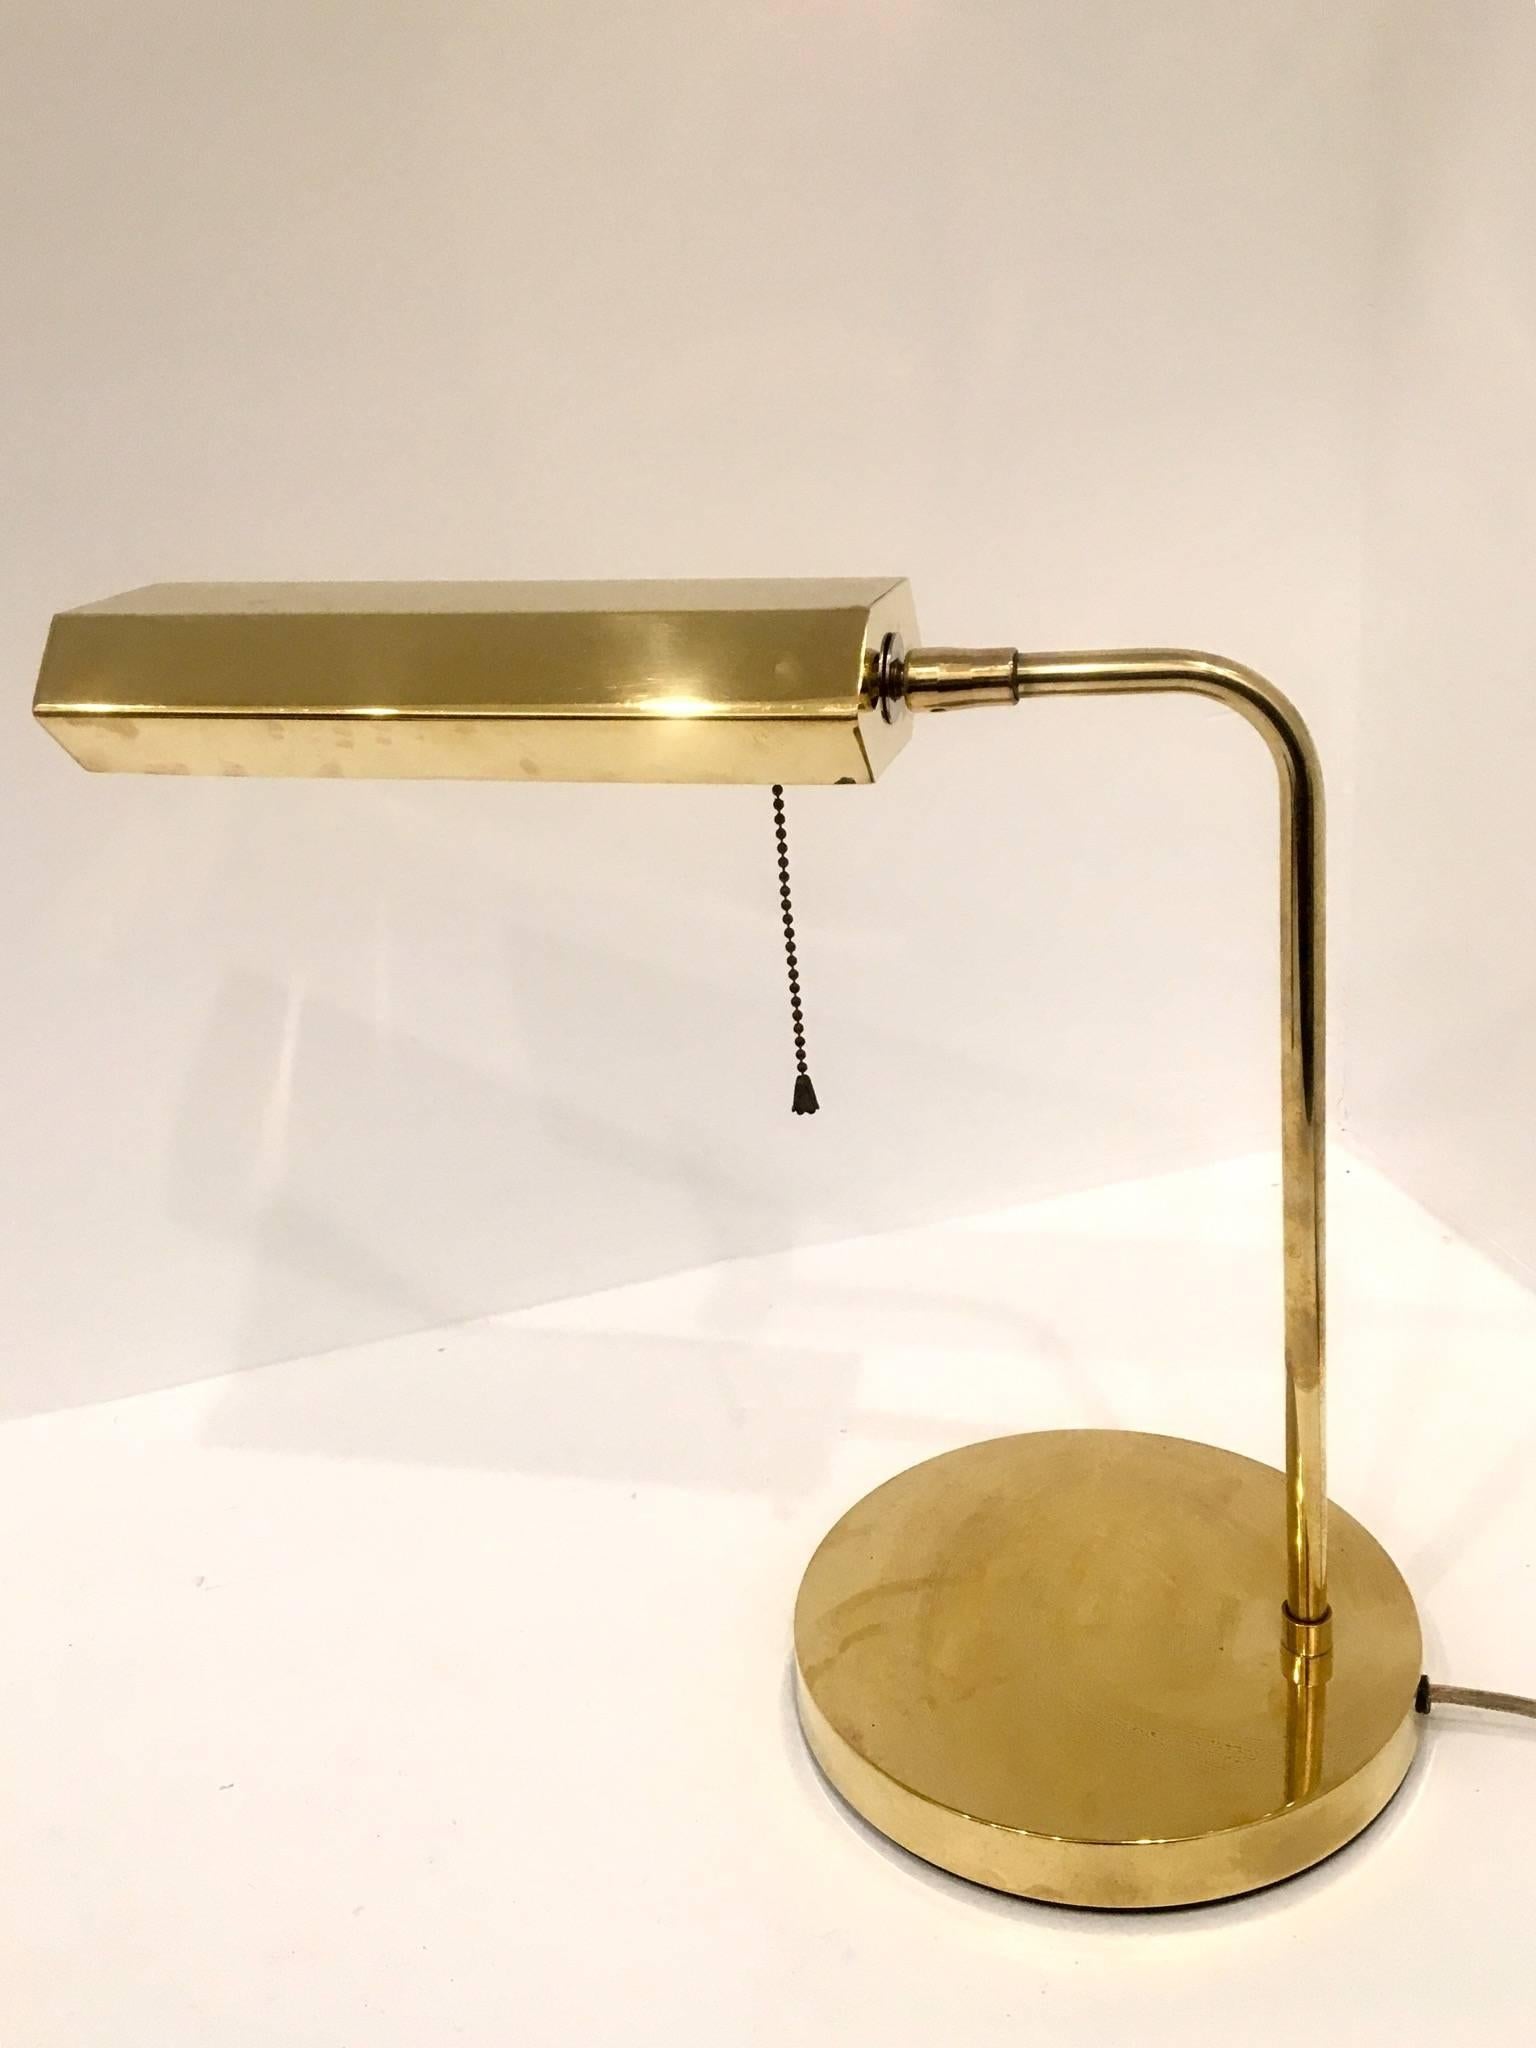 Elegant Minimalist design on this polished brass desk lamp, circa 1970s with pull off/on chain and multidirectional lampshade moves up and down and side to side.